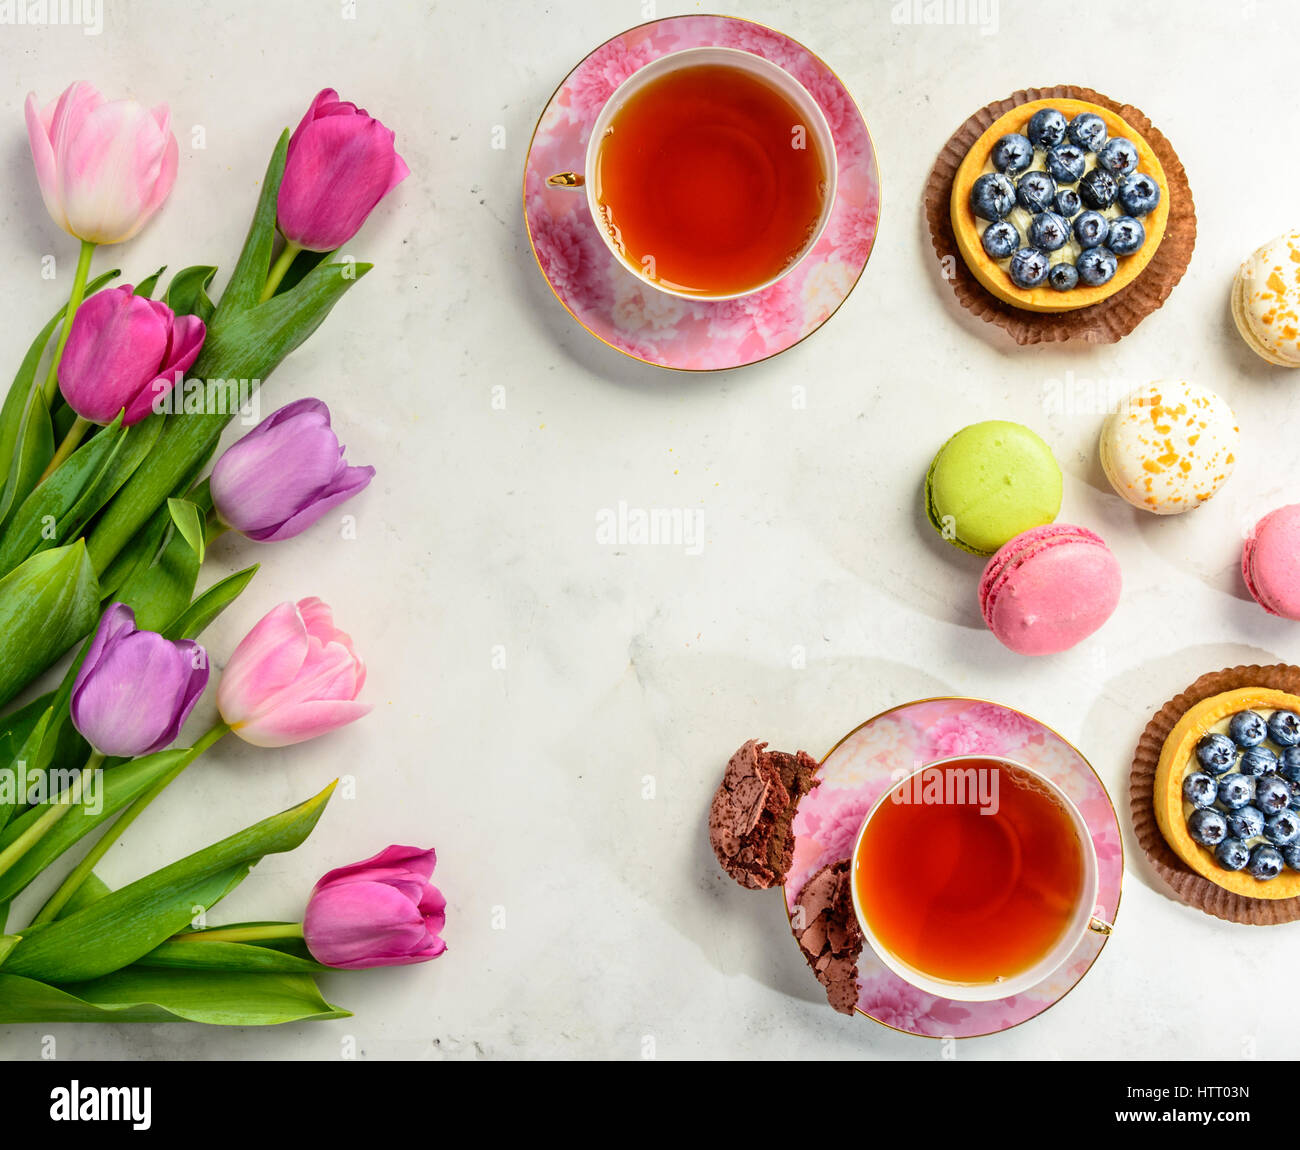 Beautiful festive bouquet of tulips, cakes and cup of tea on white background. Flat lay. Copy space. Stock Photo